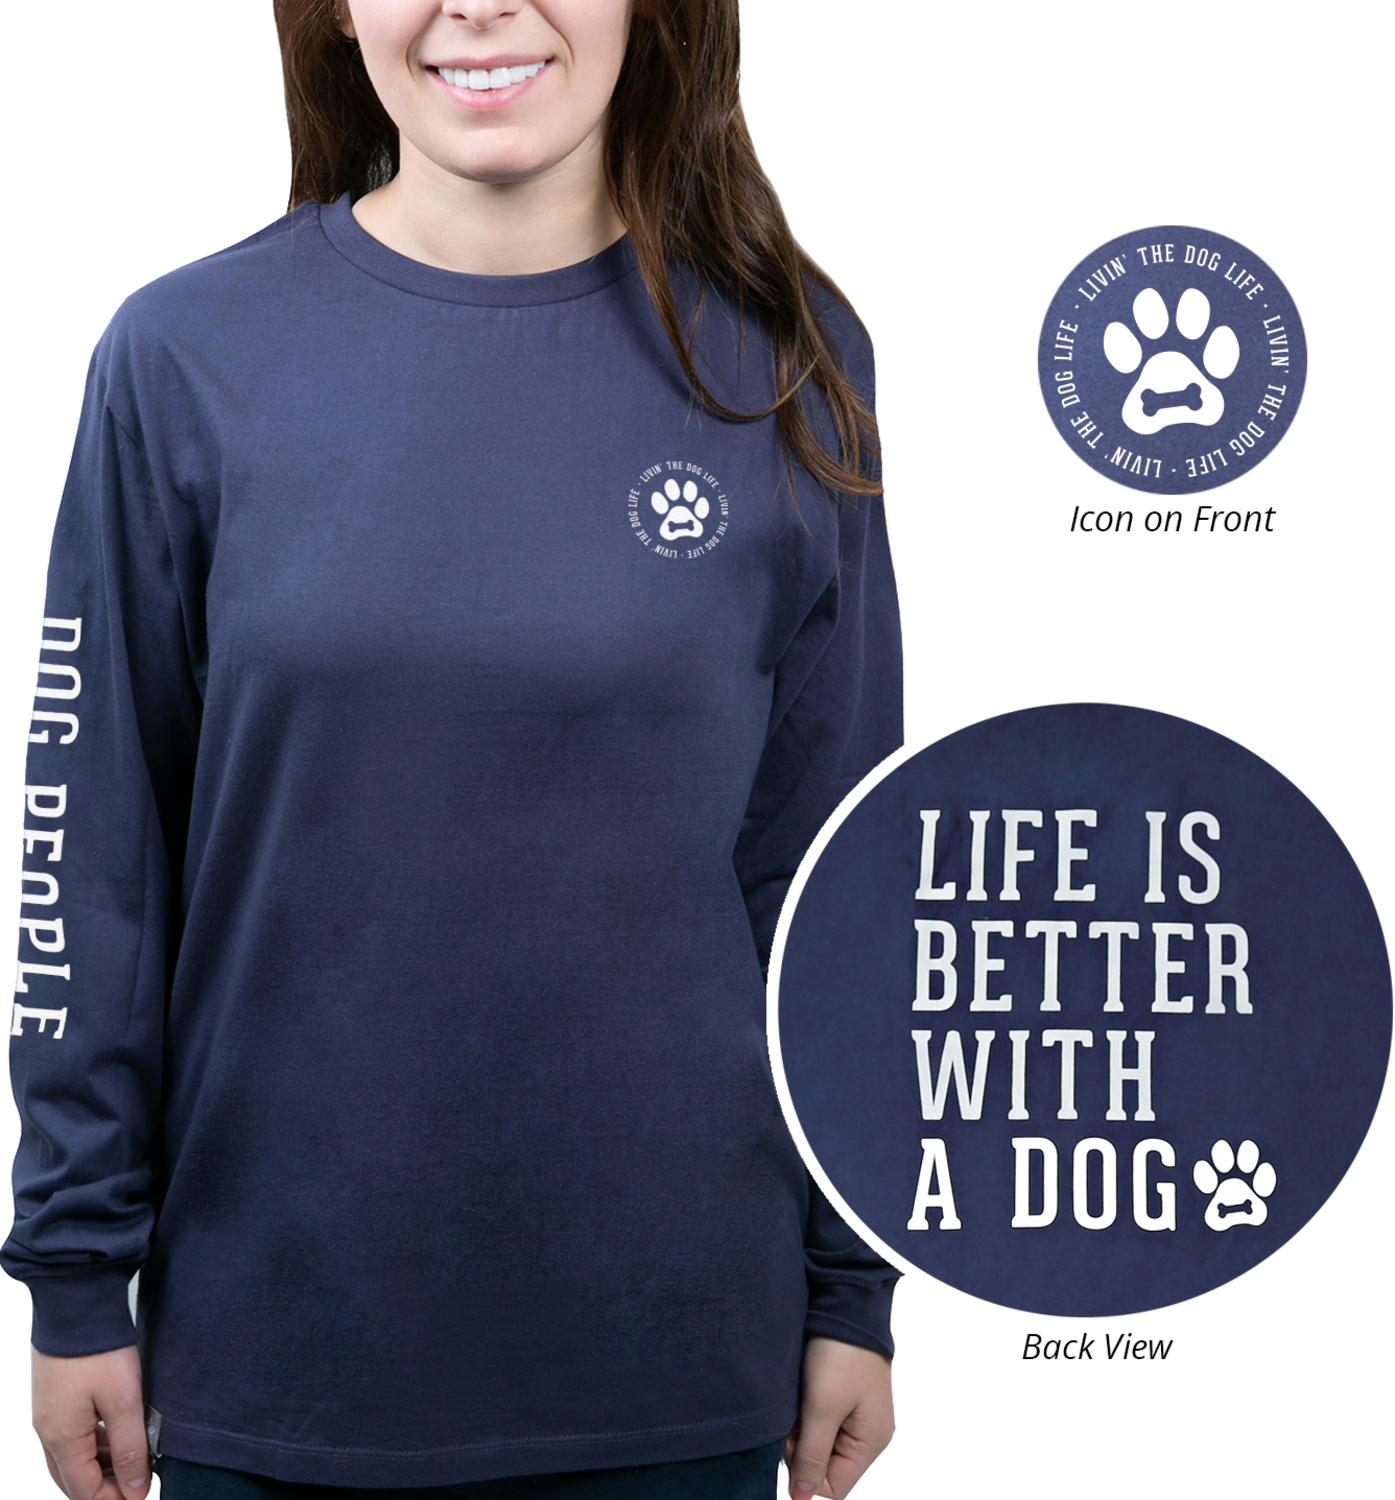 Dog People by We People - Dog People - Small Navy Unisex Long Sleeve T-Shirt